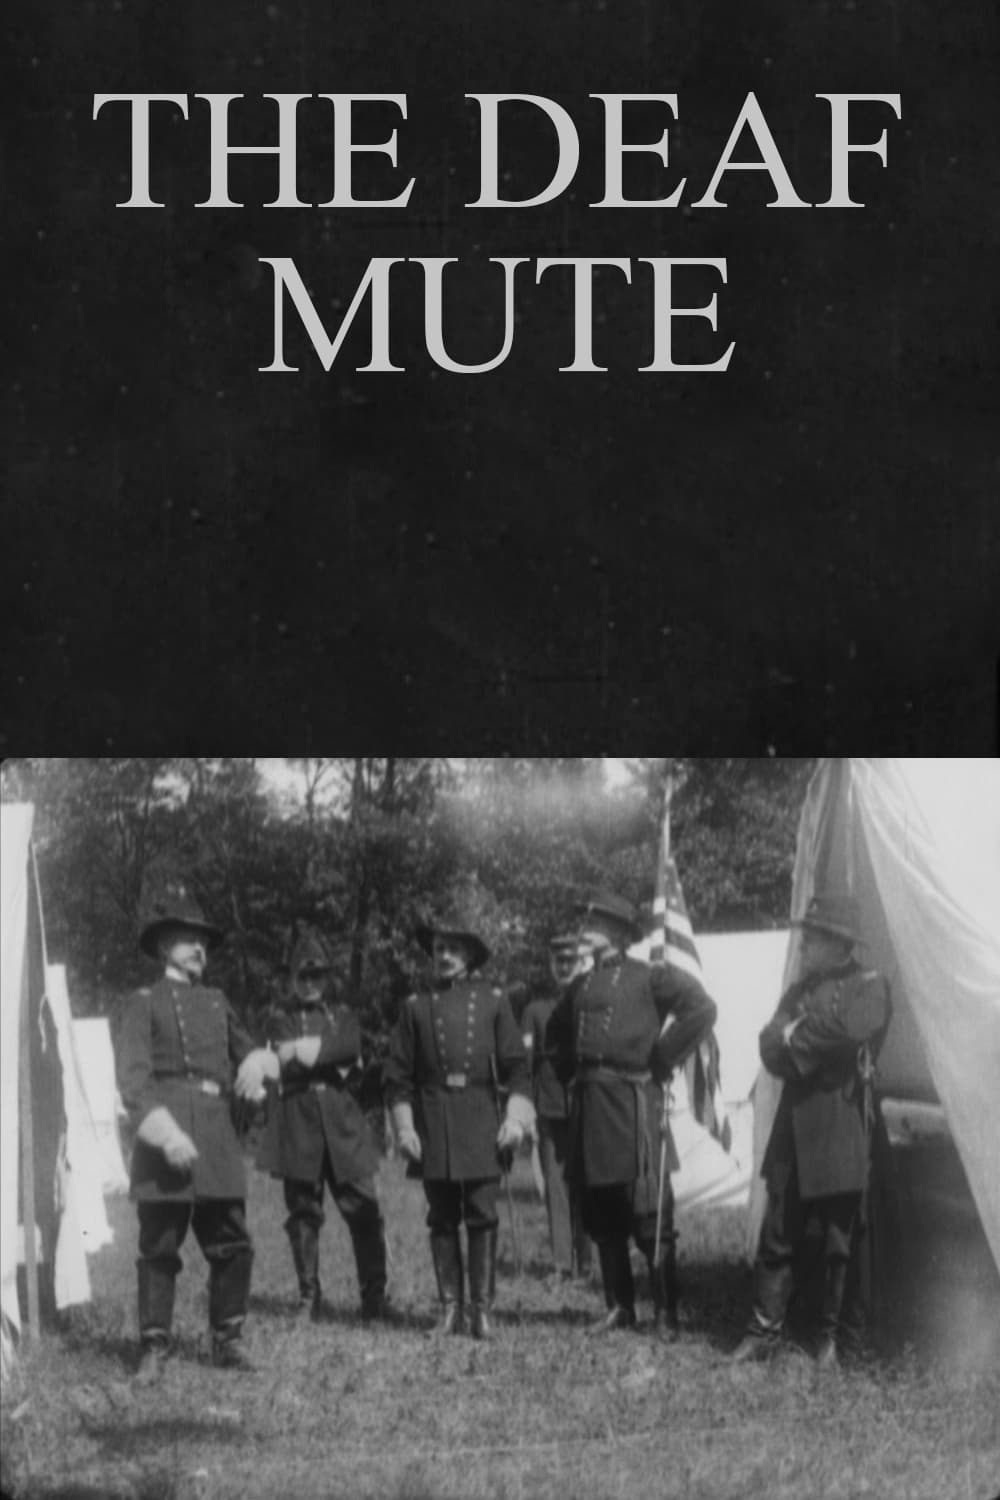 The Deaf Mute